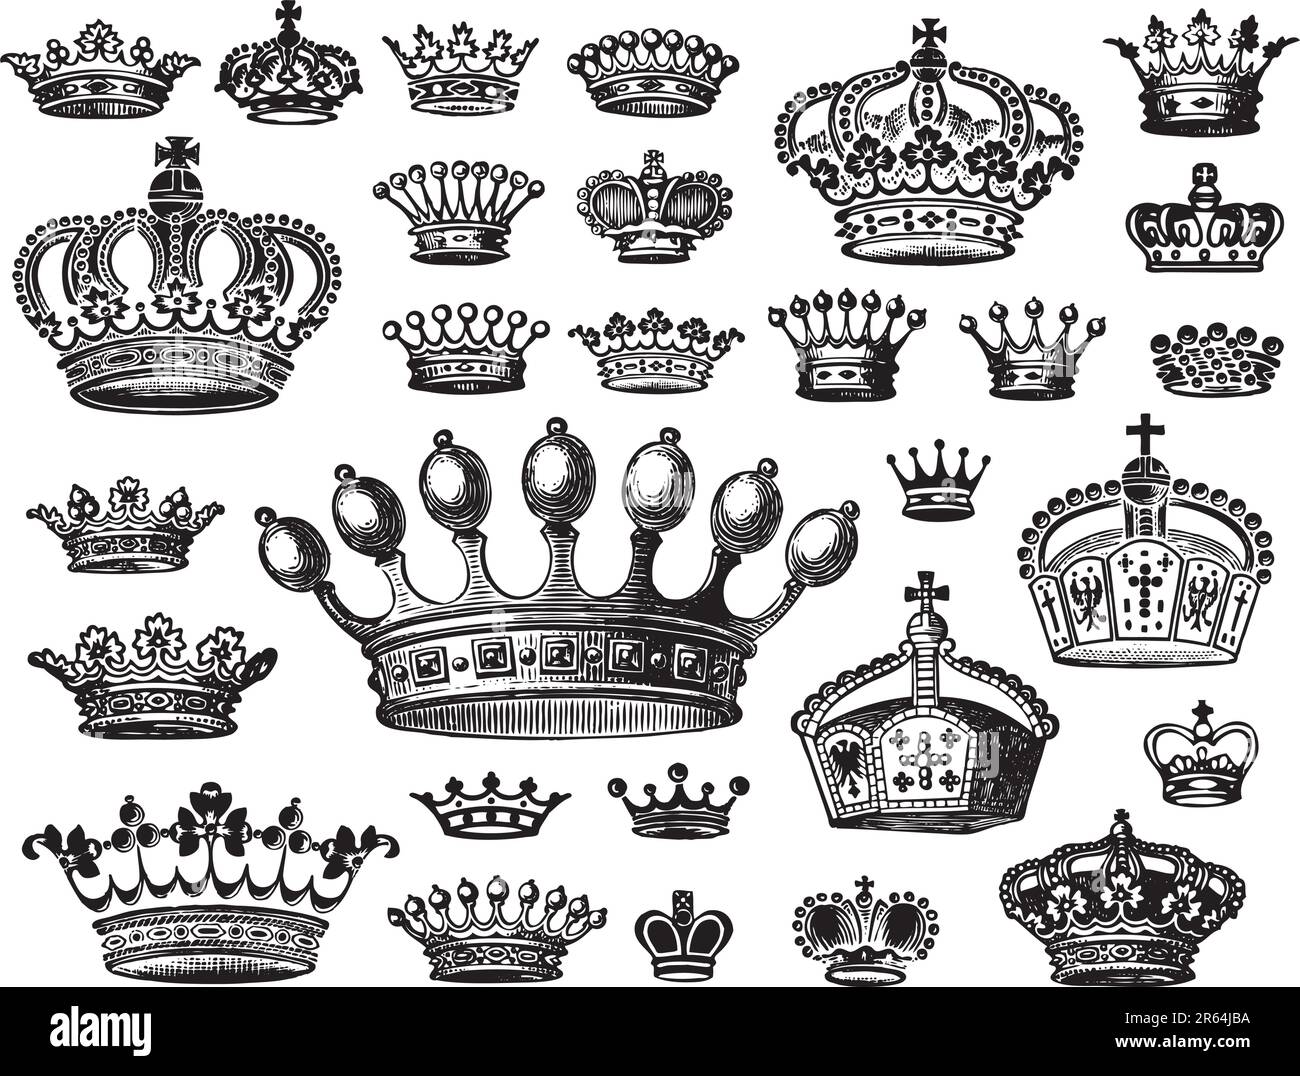 set of antique crowns engravings; scalable and editable vector illustrations Stock Vector